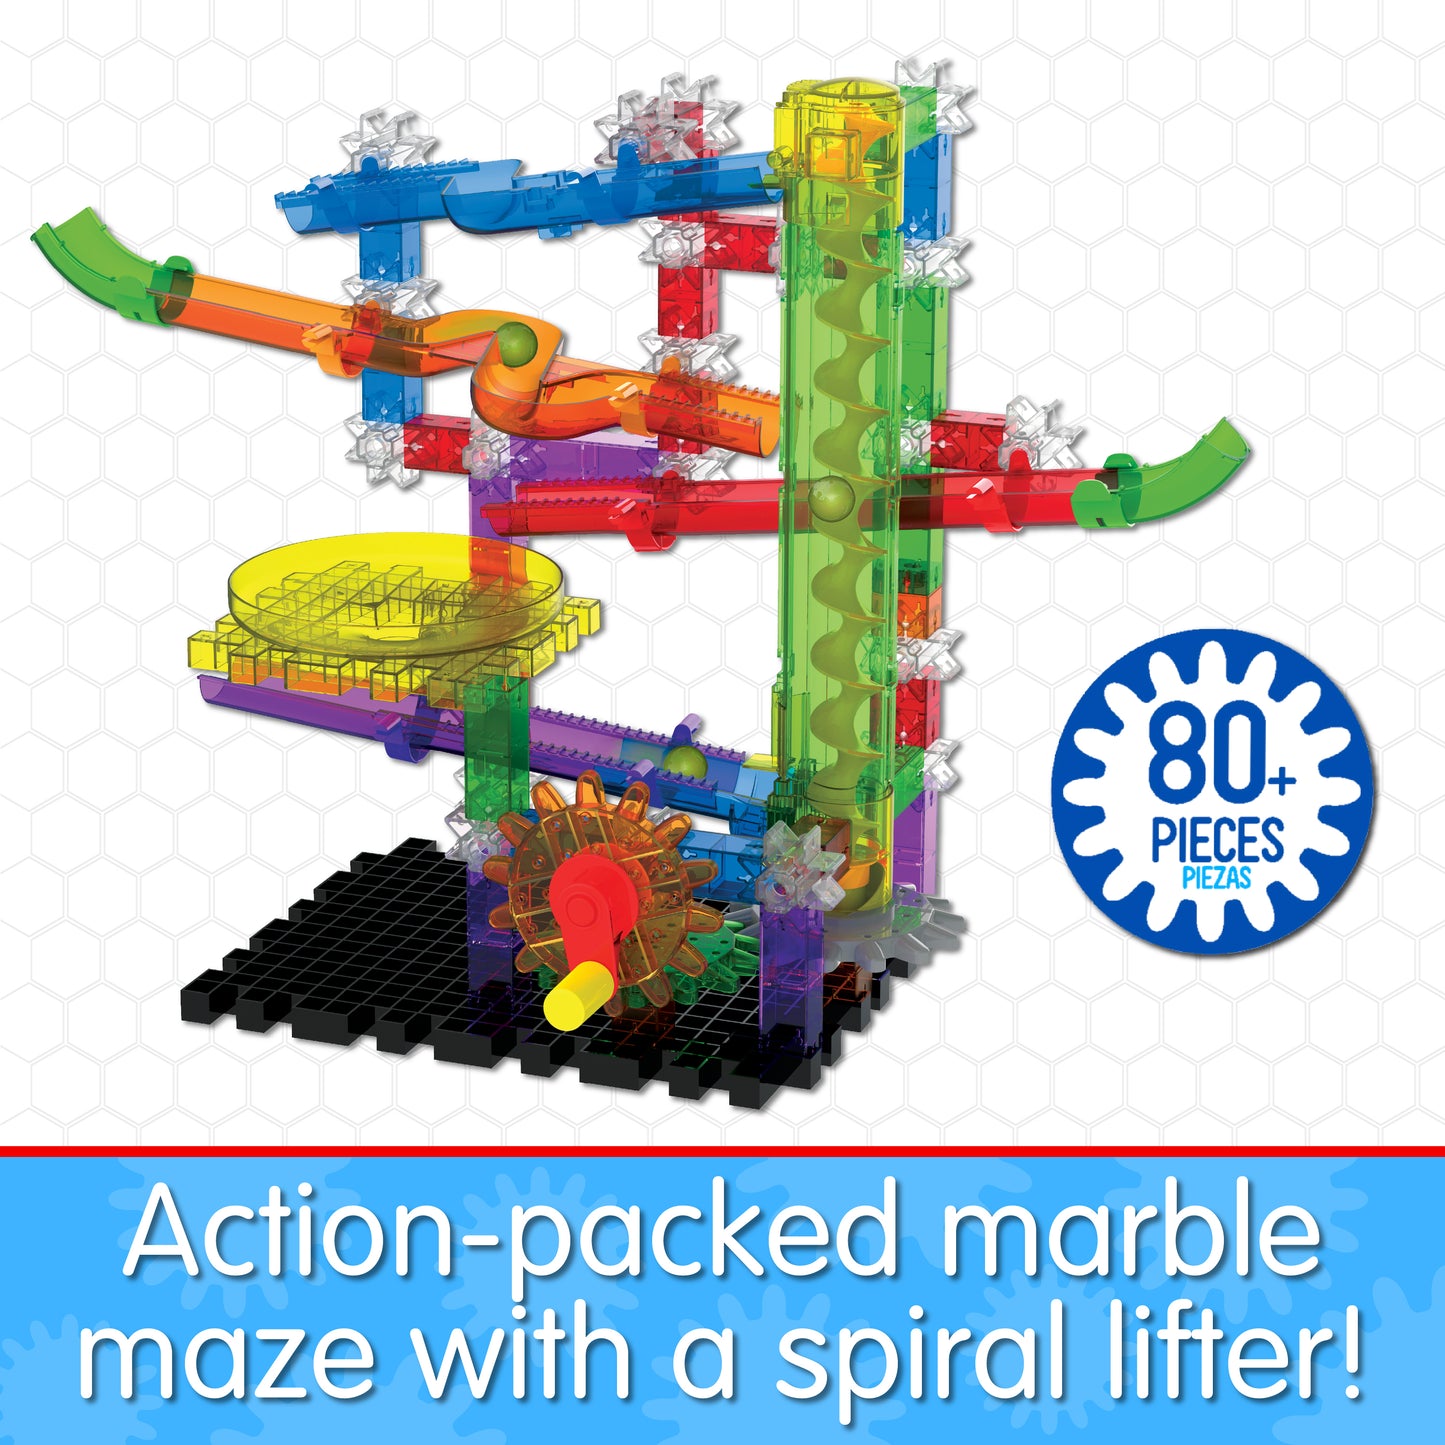 Infographic about Zoomerang 2.0 that says, "Action-packed marble maze with a spiral lifter!"